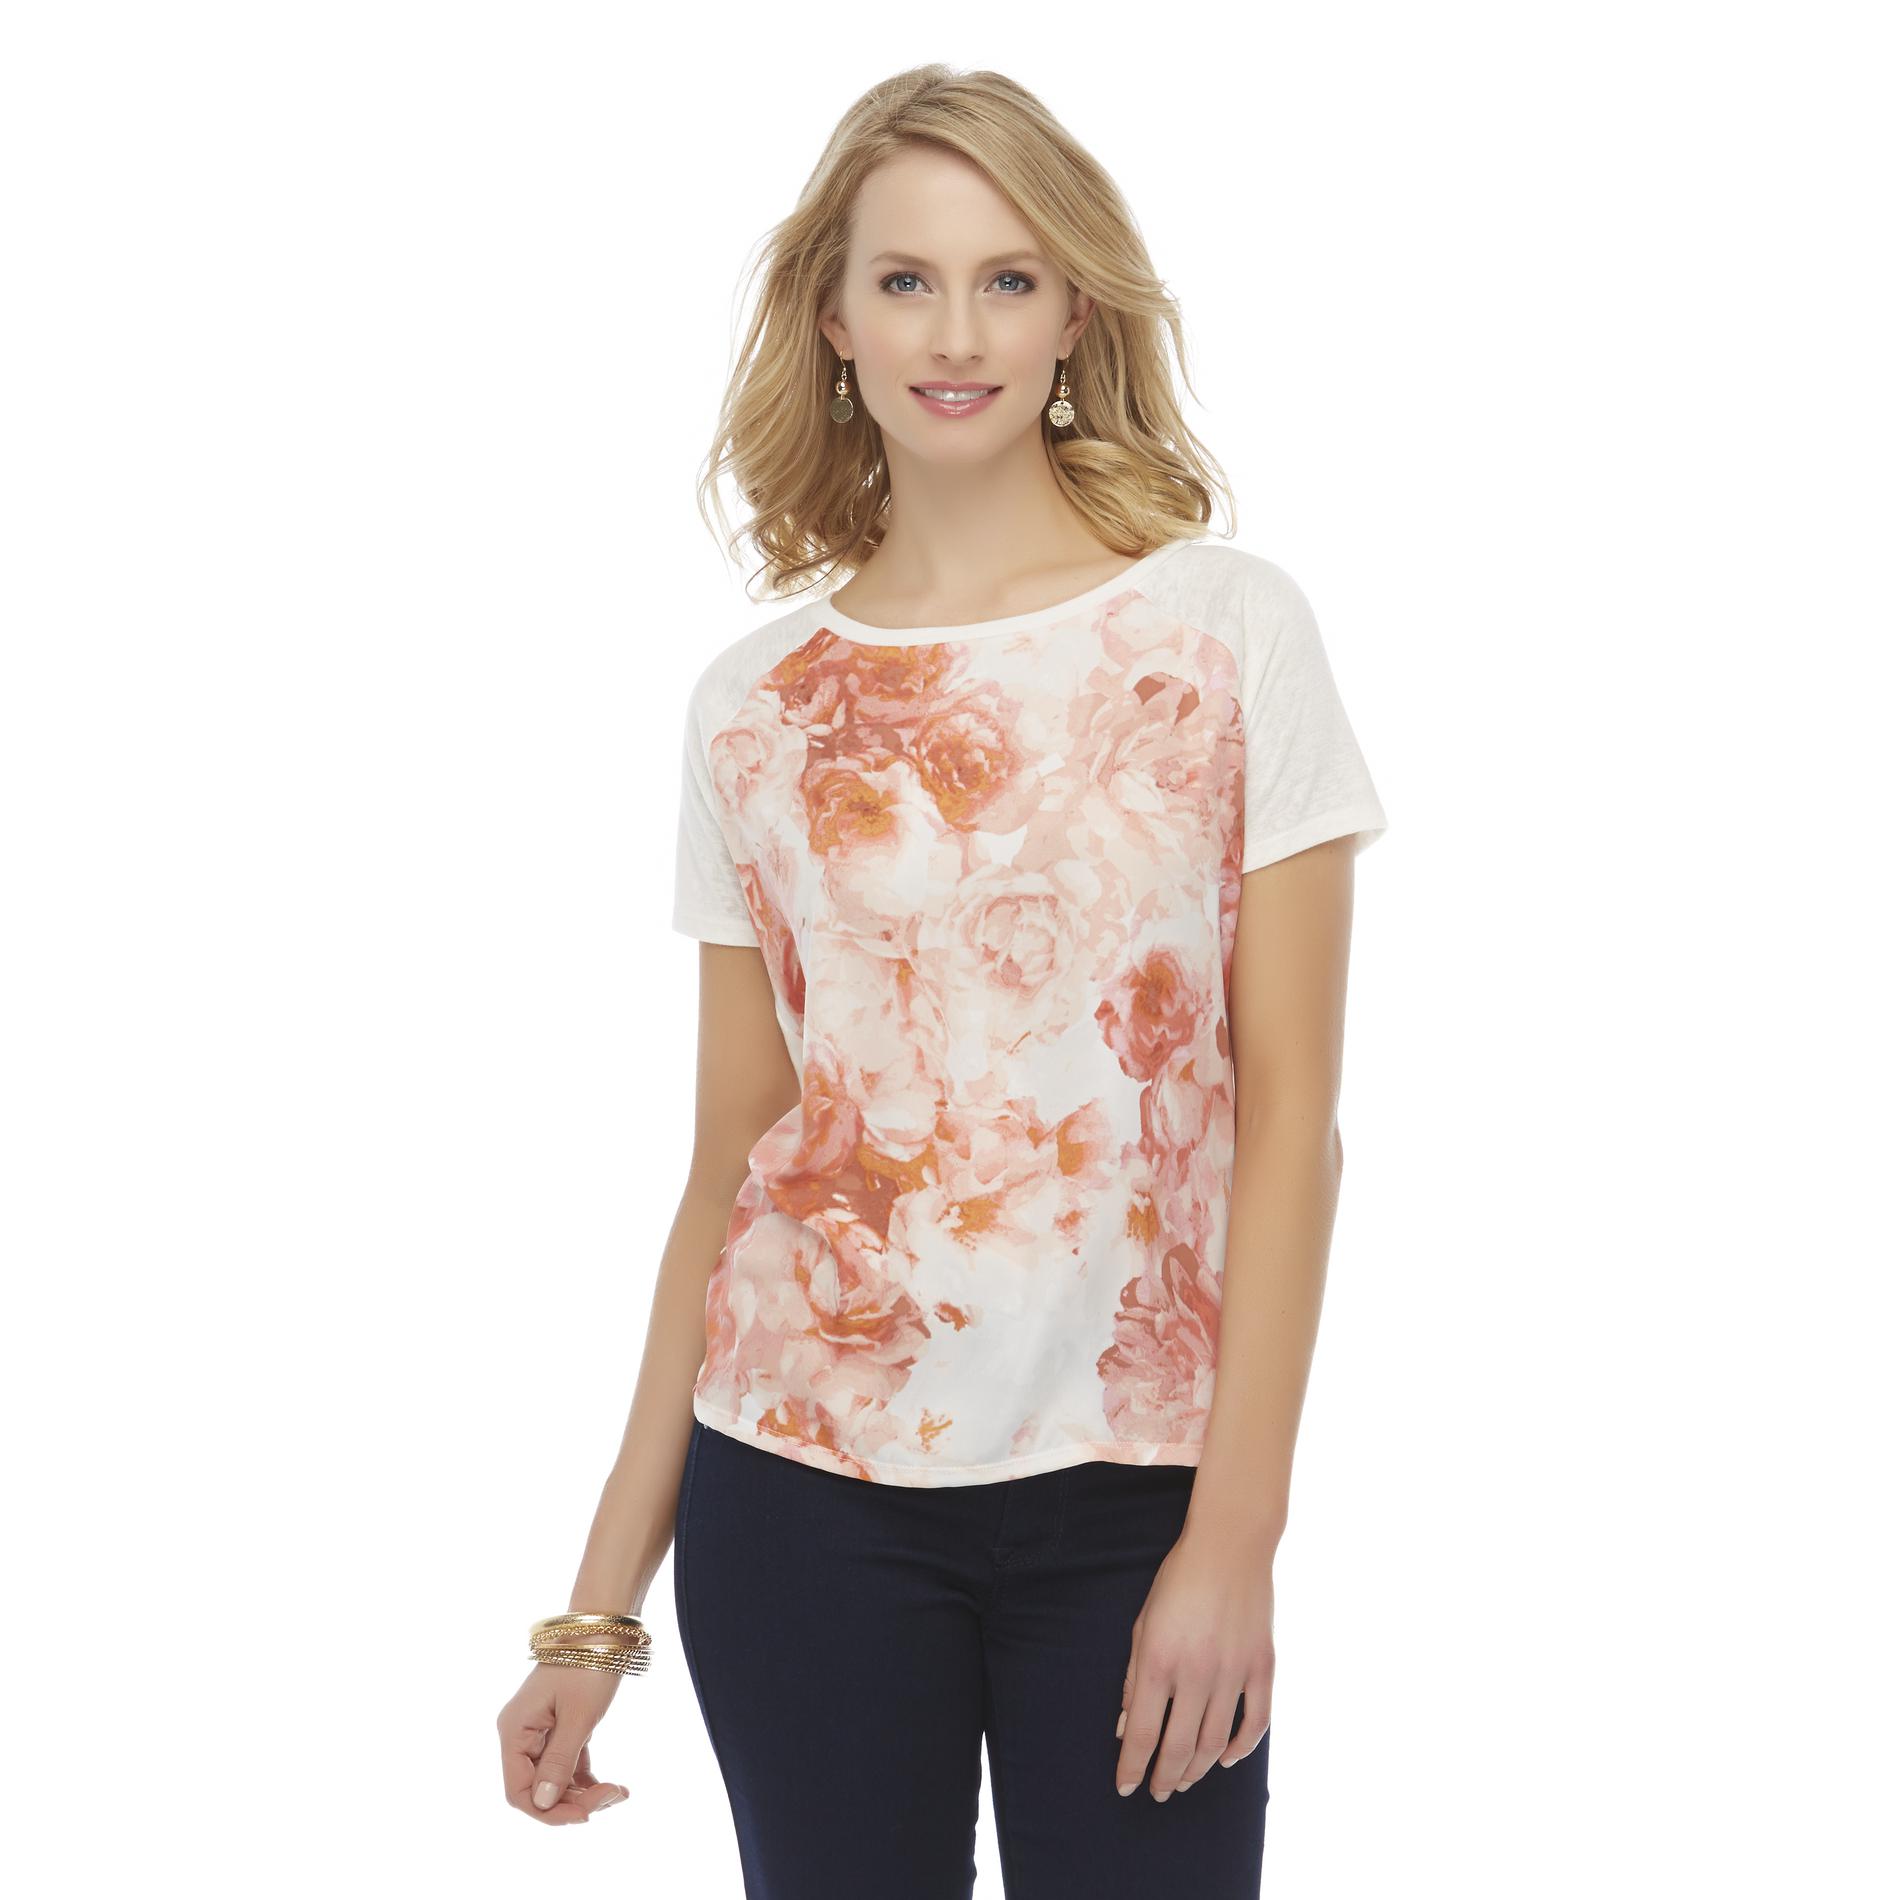 Jaclyn Smith Women's Knit Top - Floral